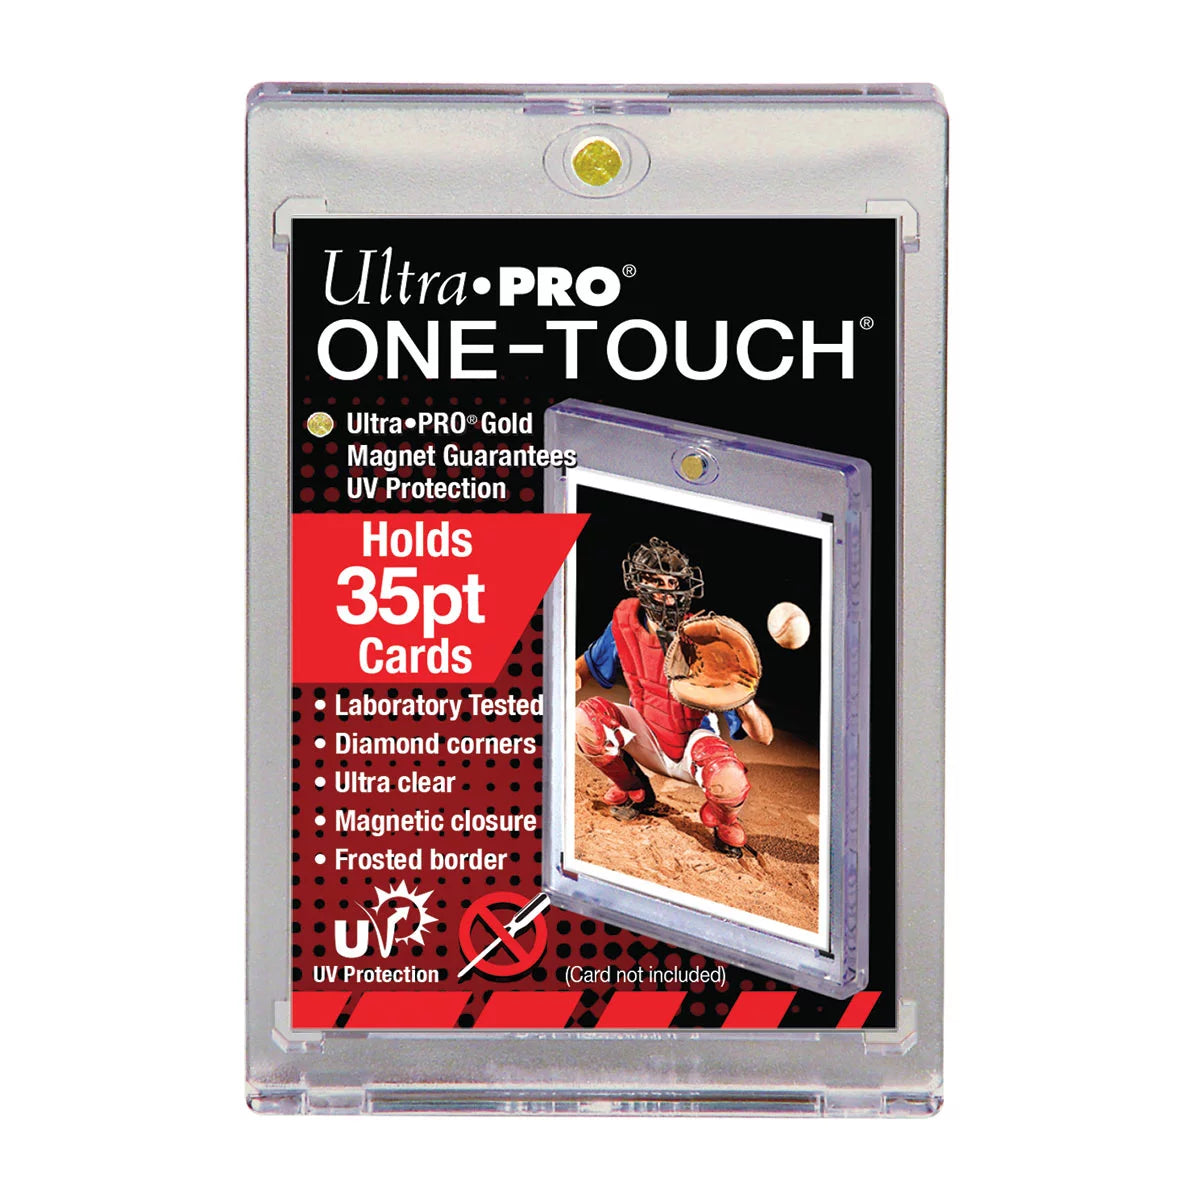 Ultra PRO's ONE-TOUCH